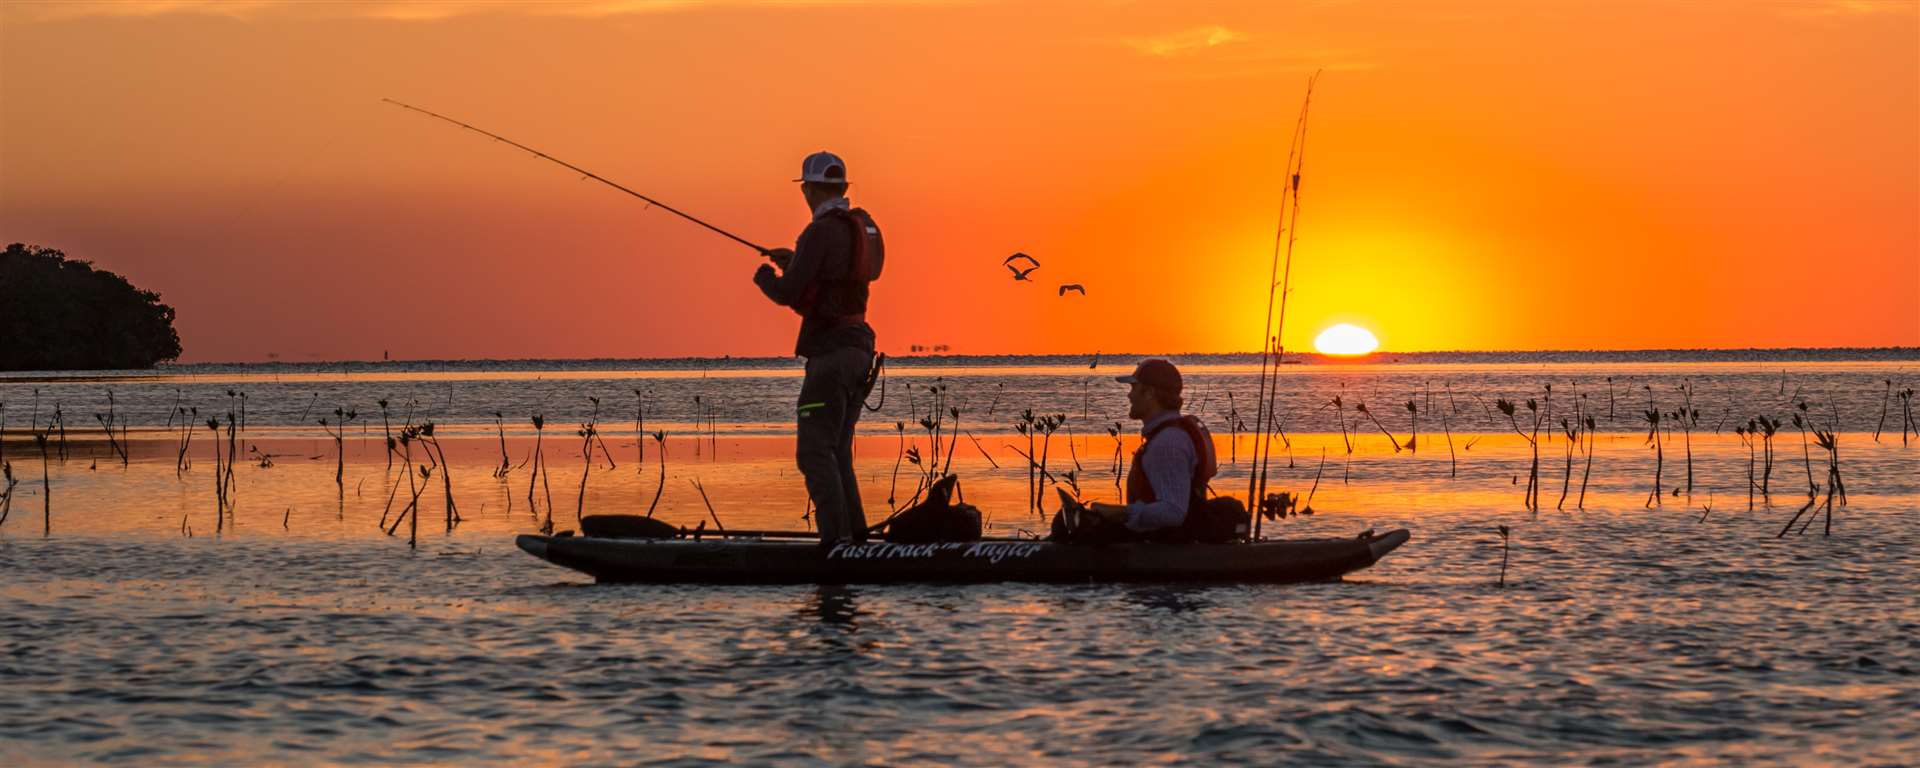 2 men kayak fishing as the sun goes down in an inflatable fishing kayak. The sunsetting on the horizon over the water creates a beautiful orange sky on blue water photo. It is a sit on top fishing kayak, one of the best inflatable fishing kayaks for sale.